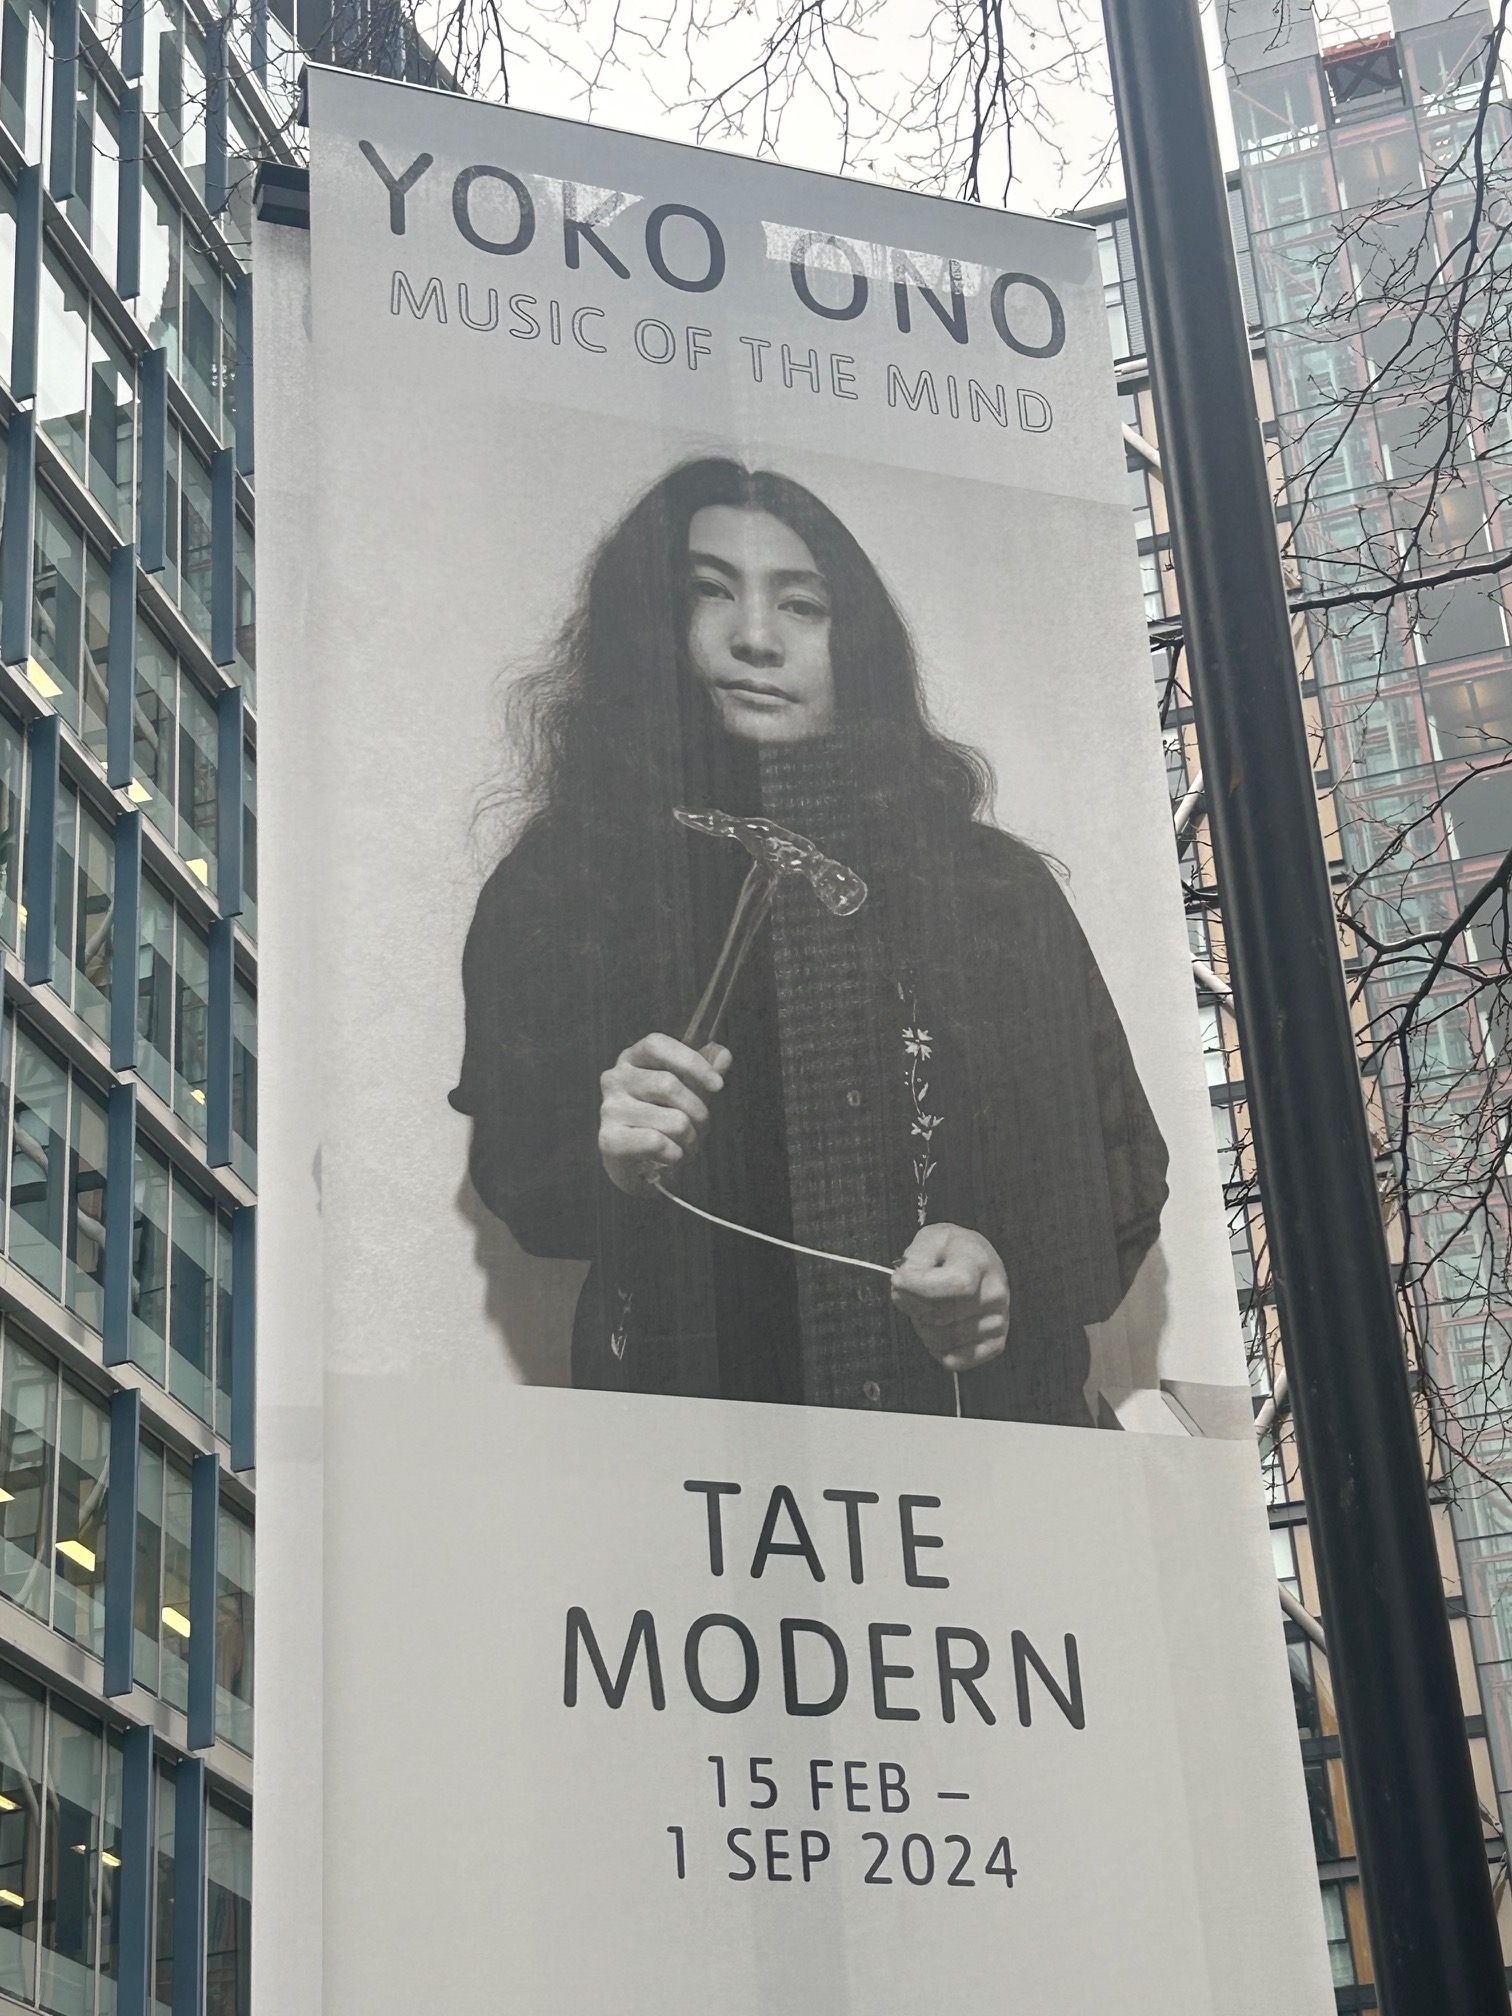 Review: Yoko Ono: Music of the Mind at Tate Modern